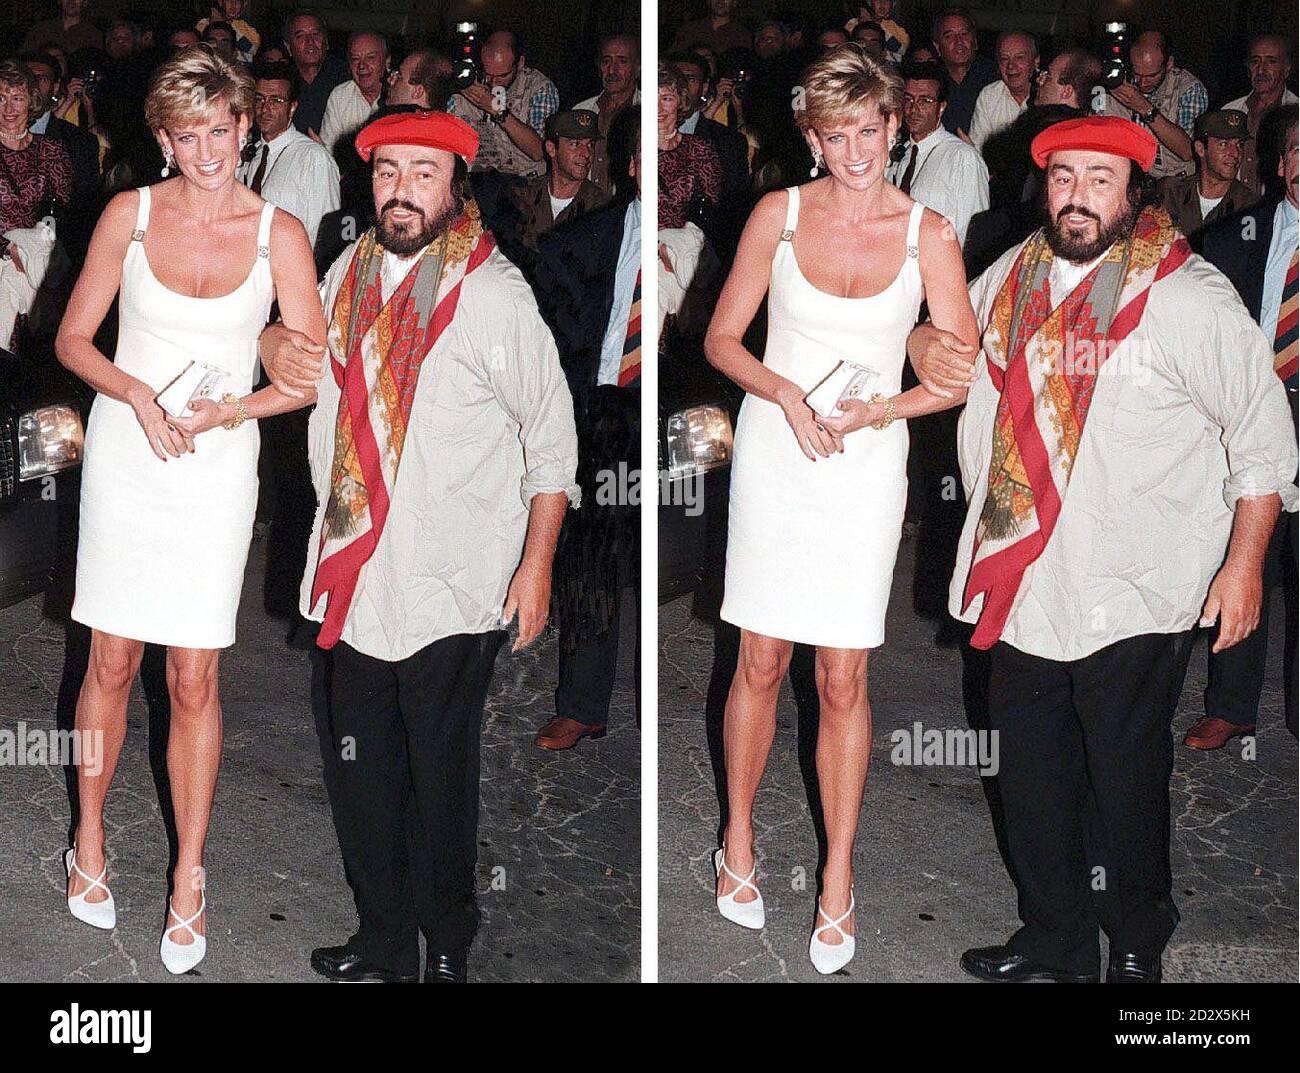 PAF: The Italian Opera star Luciano Pavarotti has been ordered to lose  wieght. This composite shows the heavyweight tenor with the Princess of  Wales and a digitally manipulated picture showing a slimline